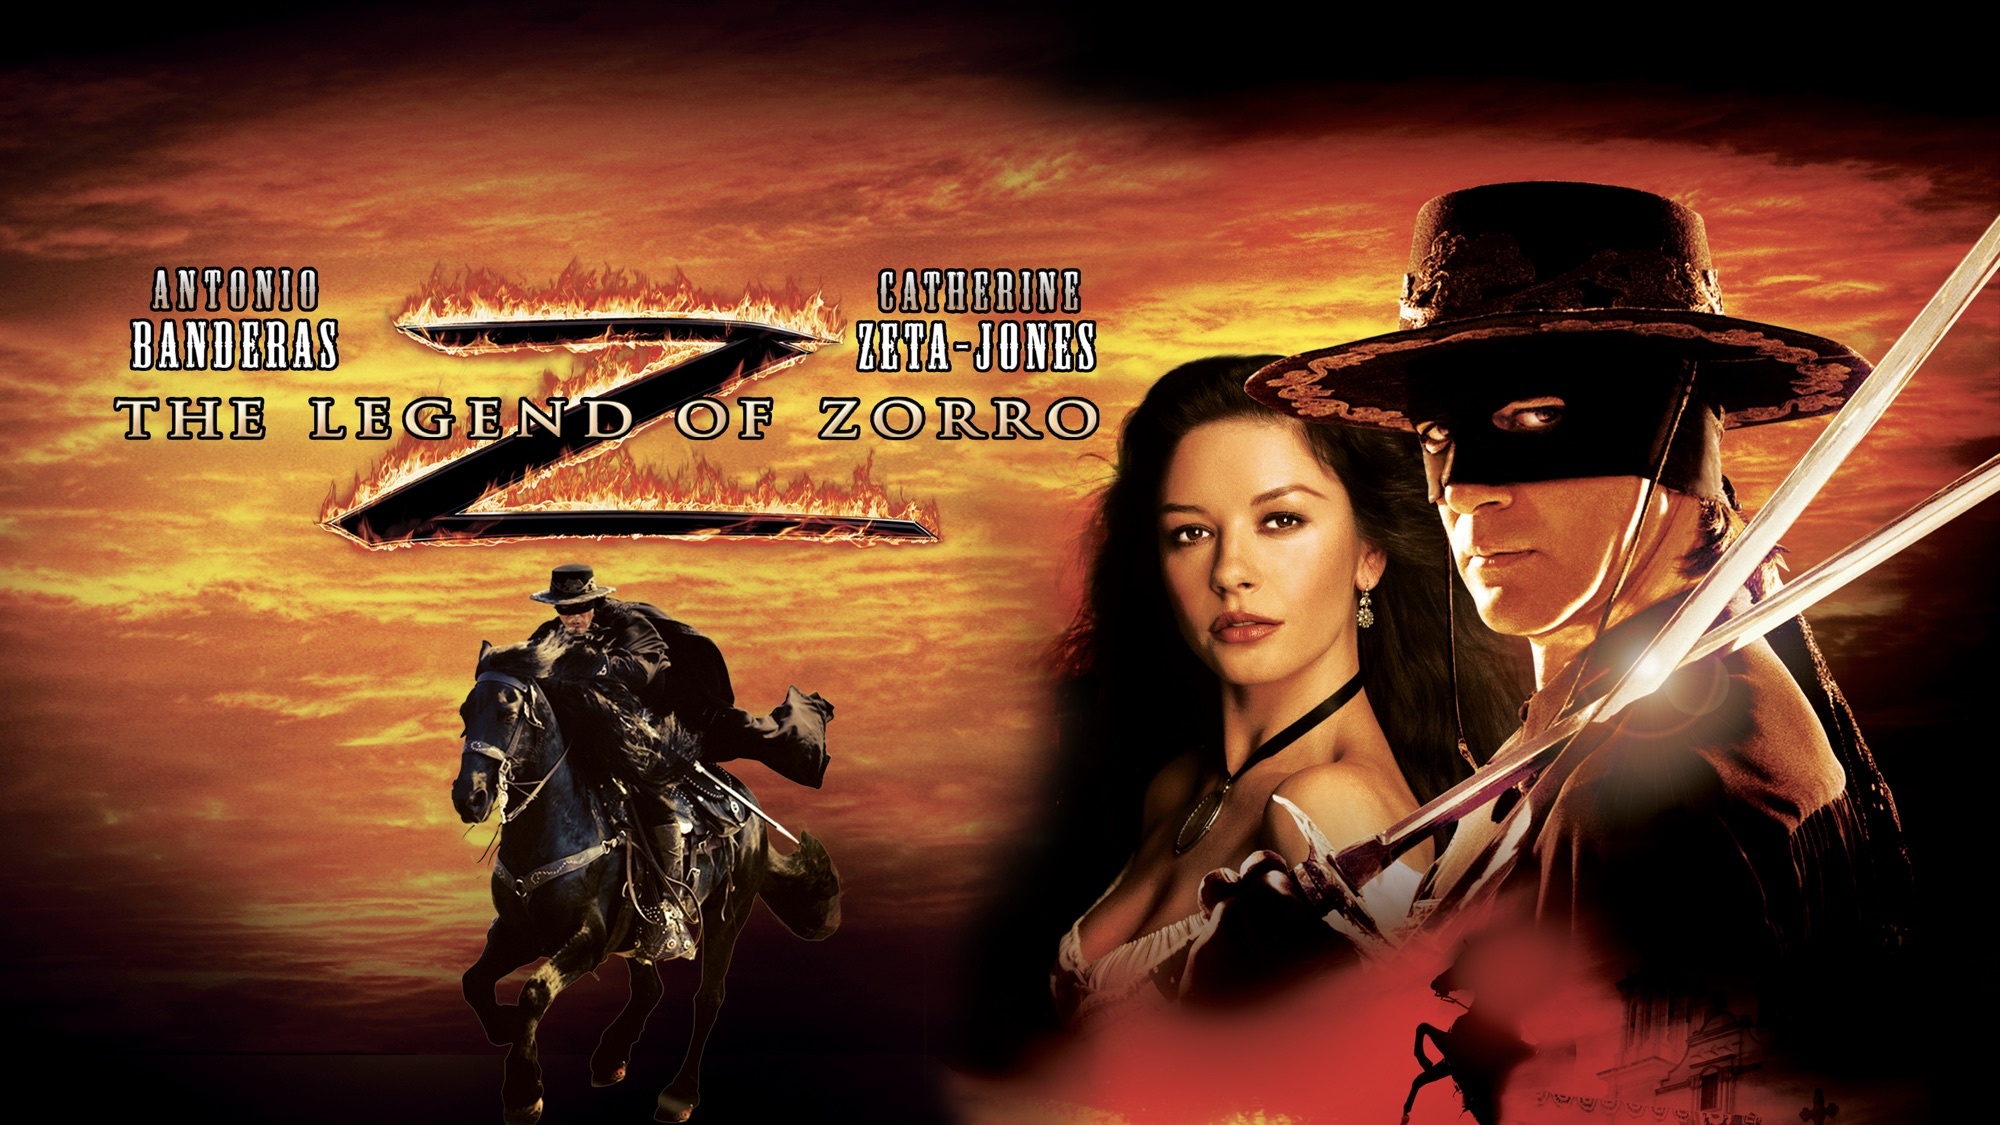 The Legend of Zorro: Antonio Banderas and Catherine Zeta-Jones reprise their roles as the titular hero and his spouse. 2000x1130 HD Wallpaper.